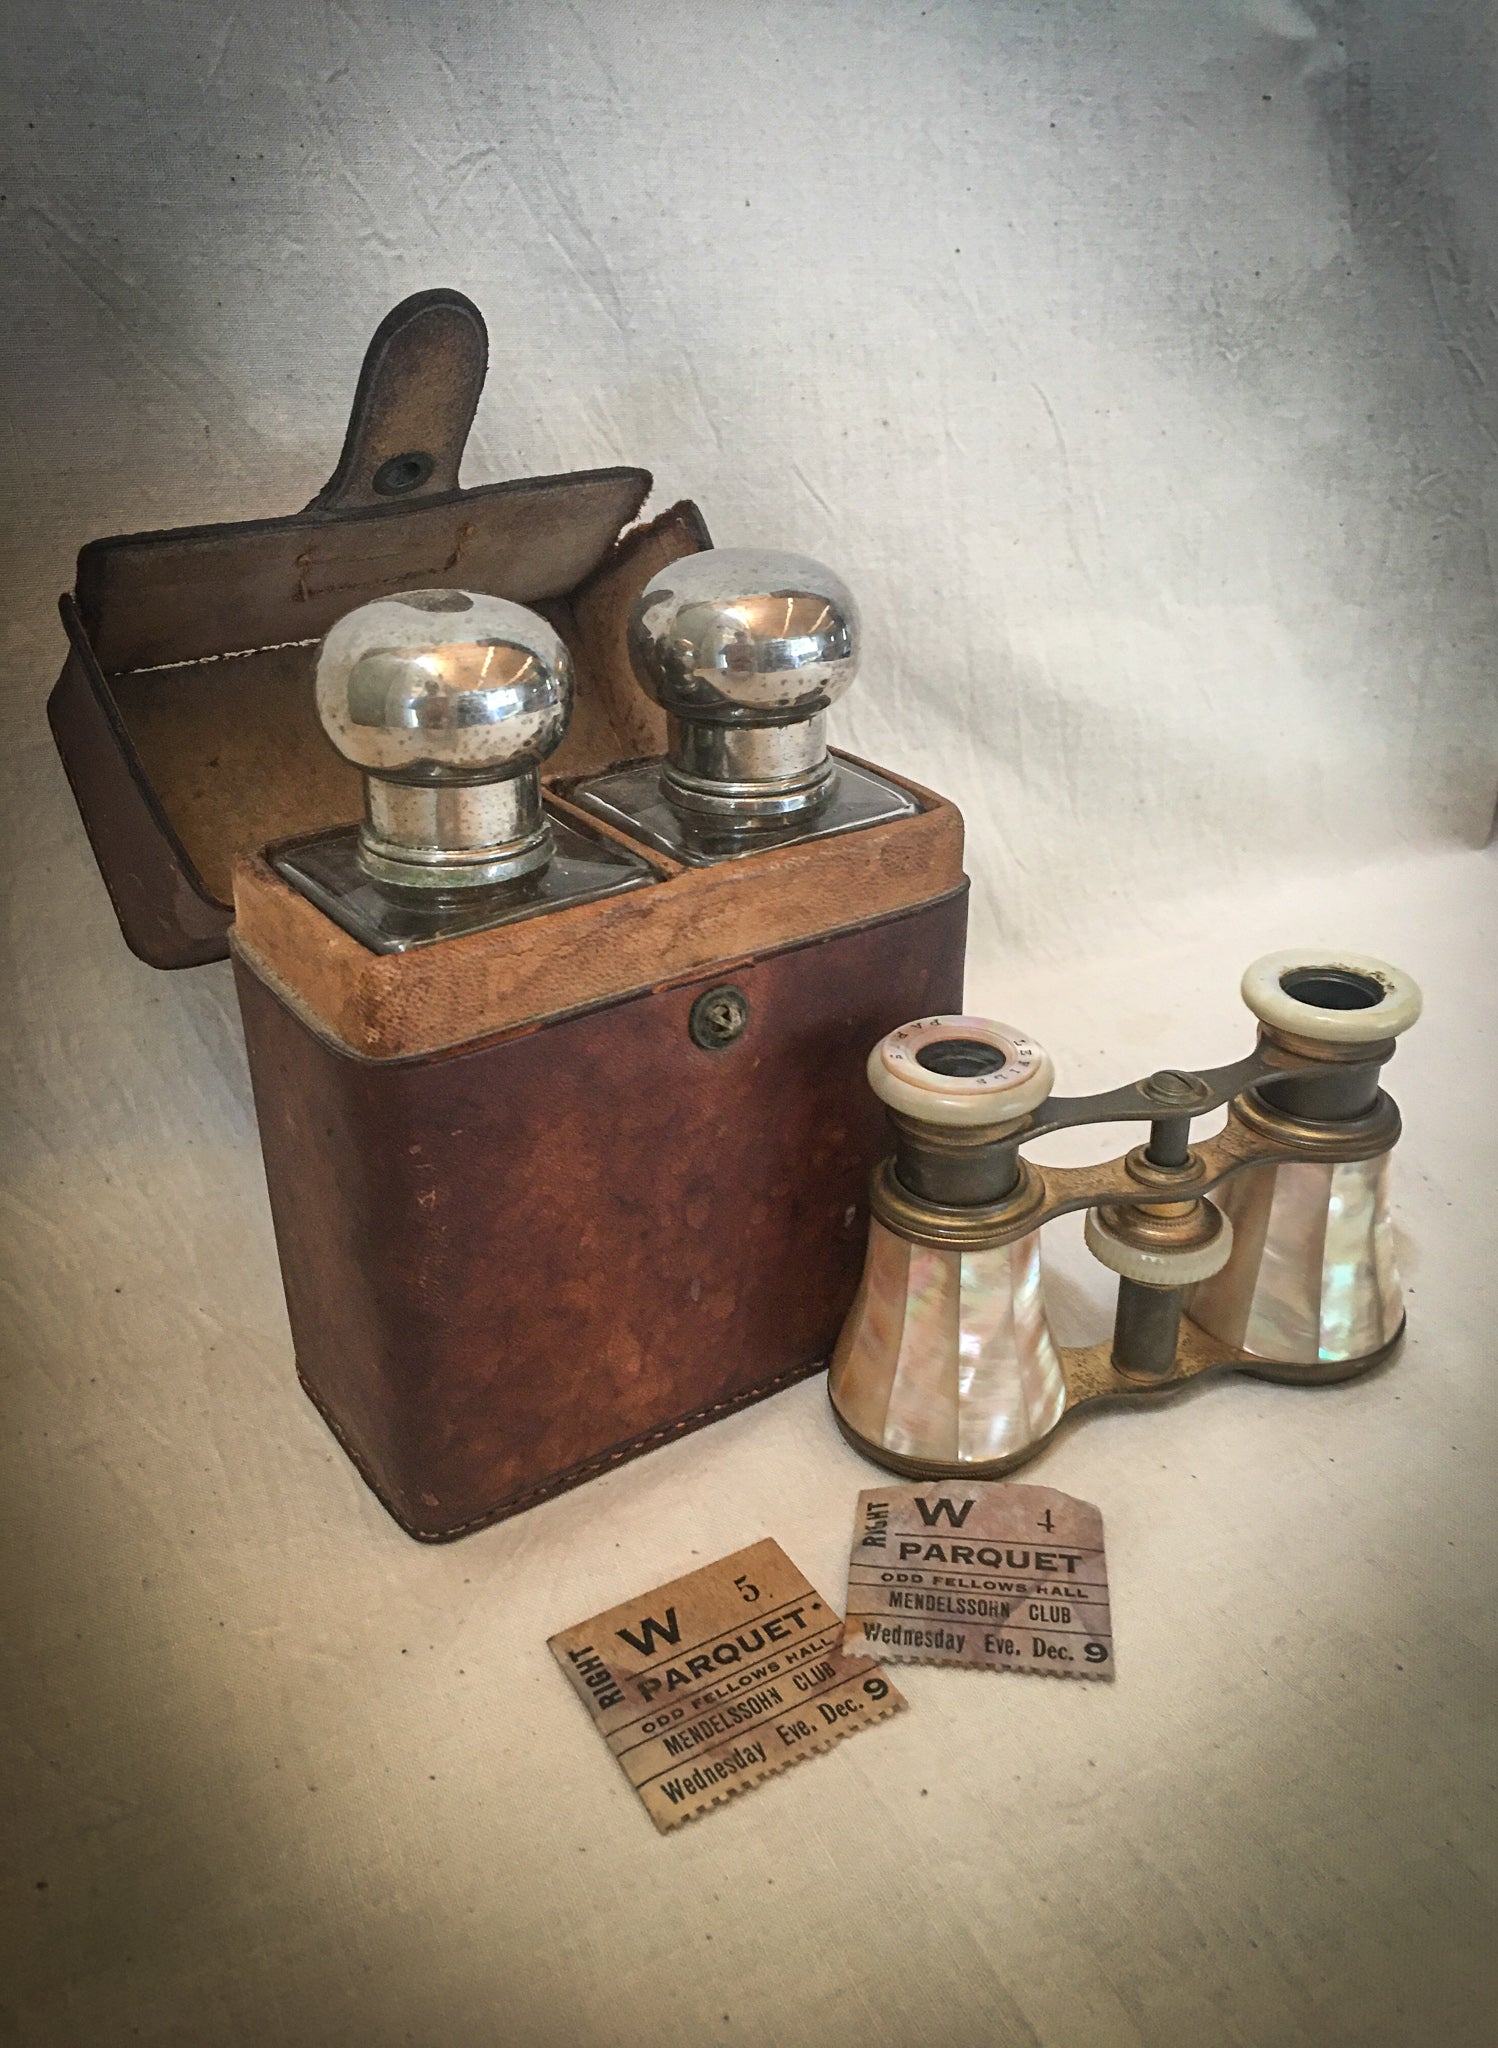 A Night Out: 1920’s Medicine Bottles with Silver Tops, in a Leather Travel Case AND 1910’s LeFils Paris Mother of Pearl Opera Glasses